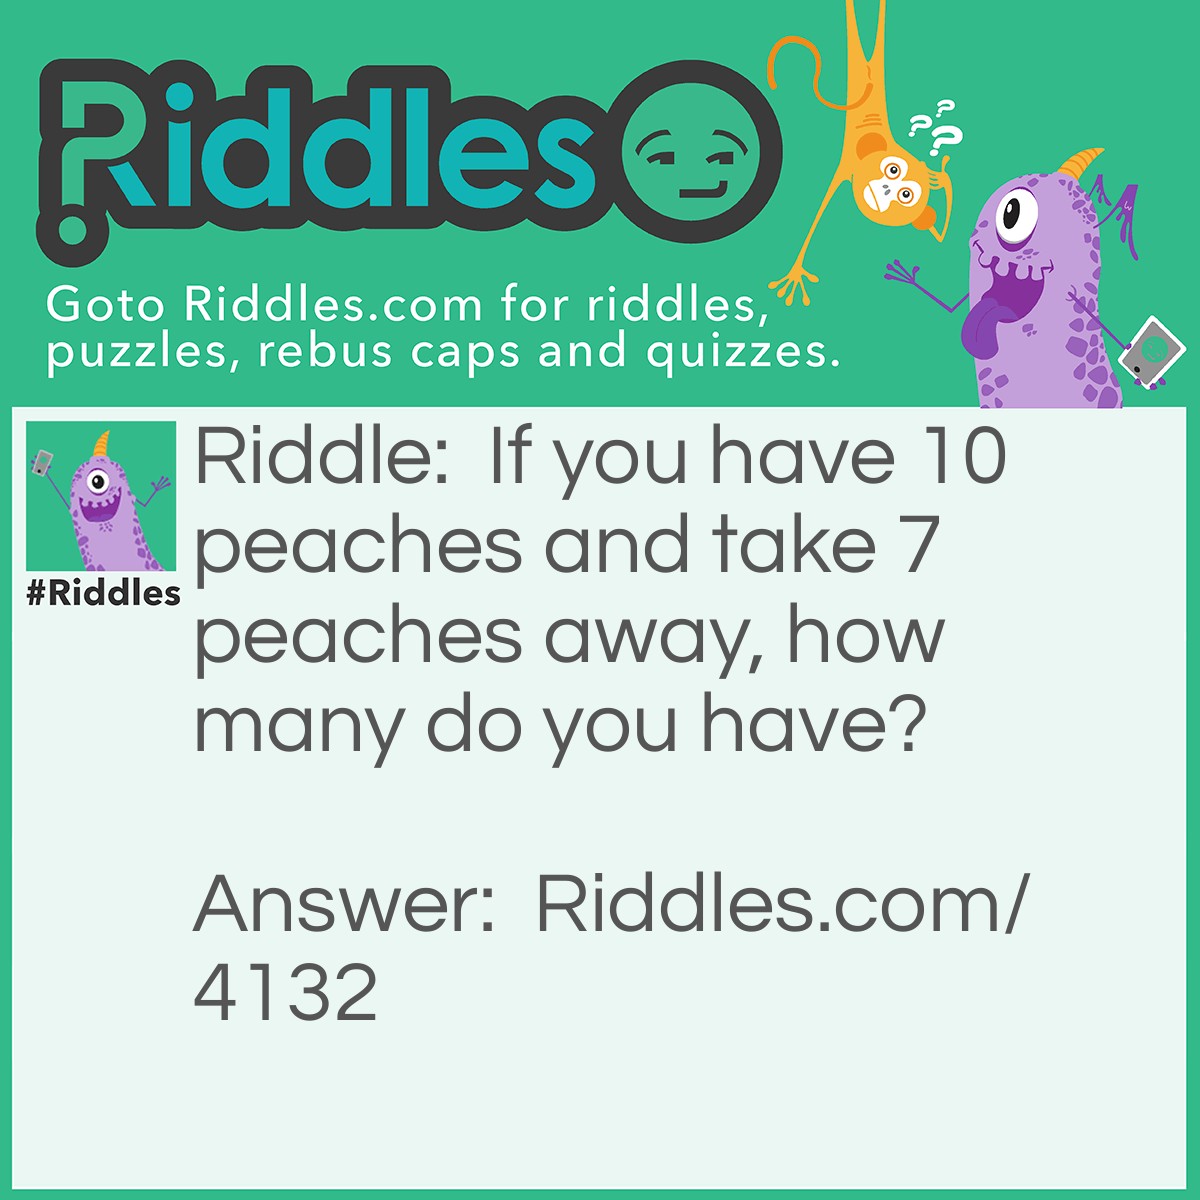 Riddle: If you have 10 peaches and take 7 peaches away, how many do you have? Answer: 7, you took 7 peaches away with you.  Duhhhhh